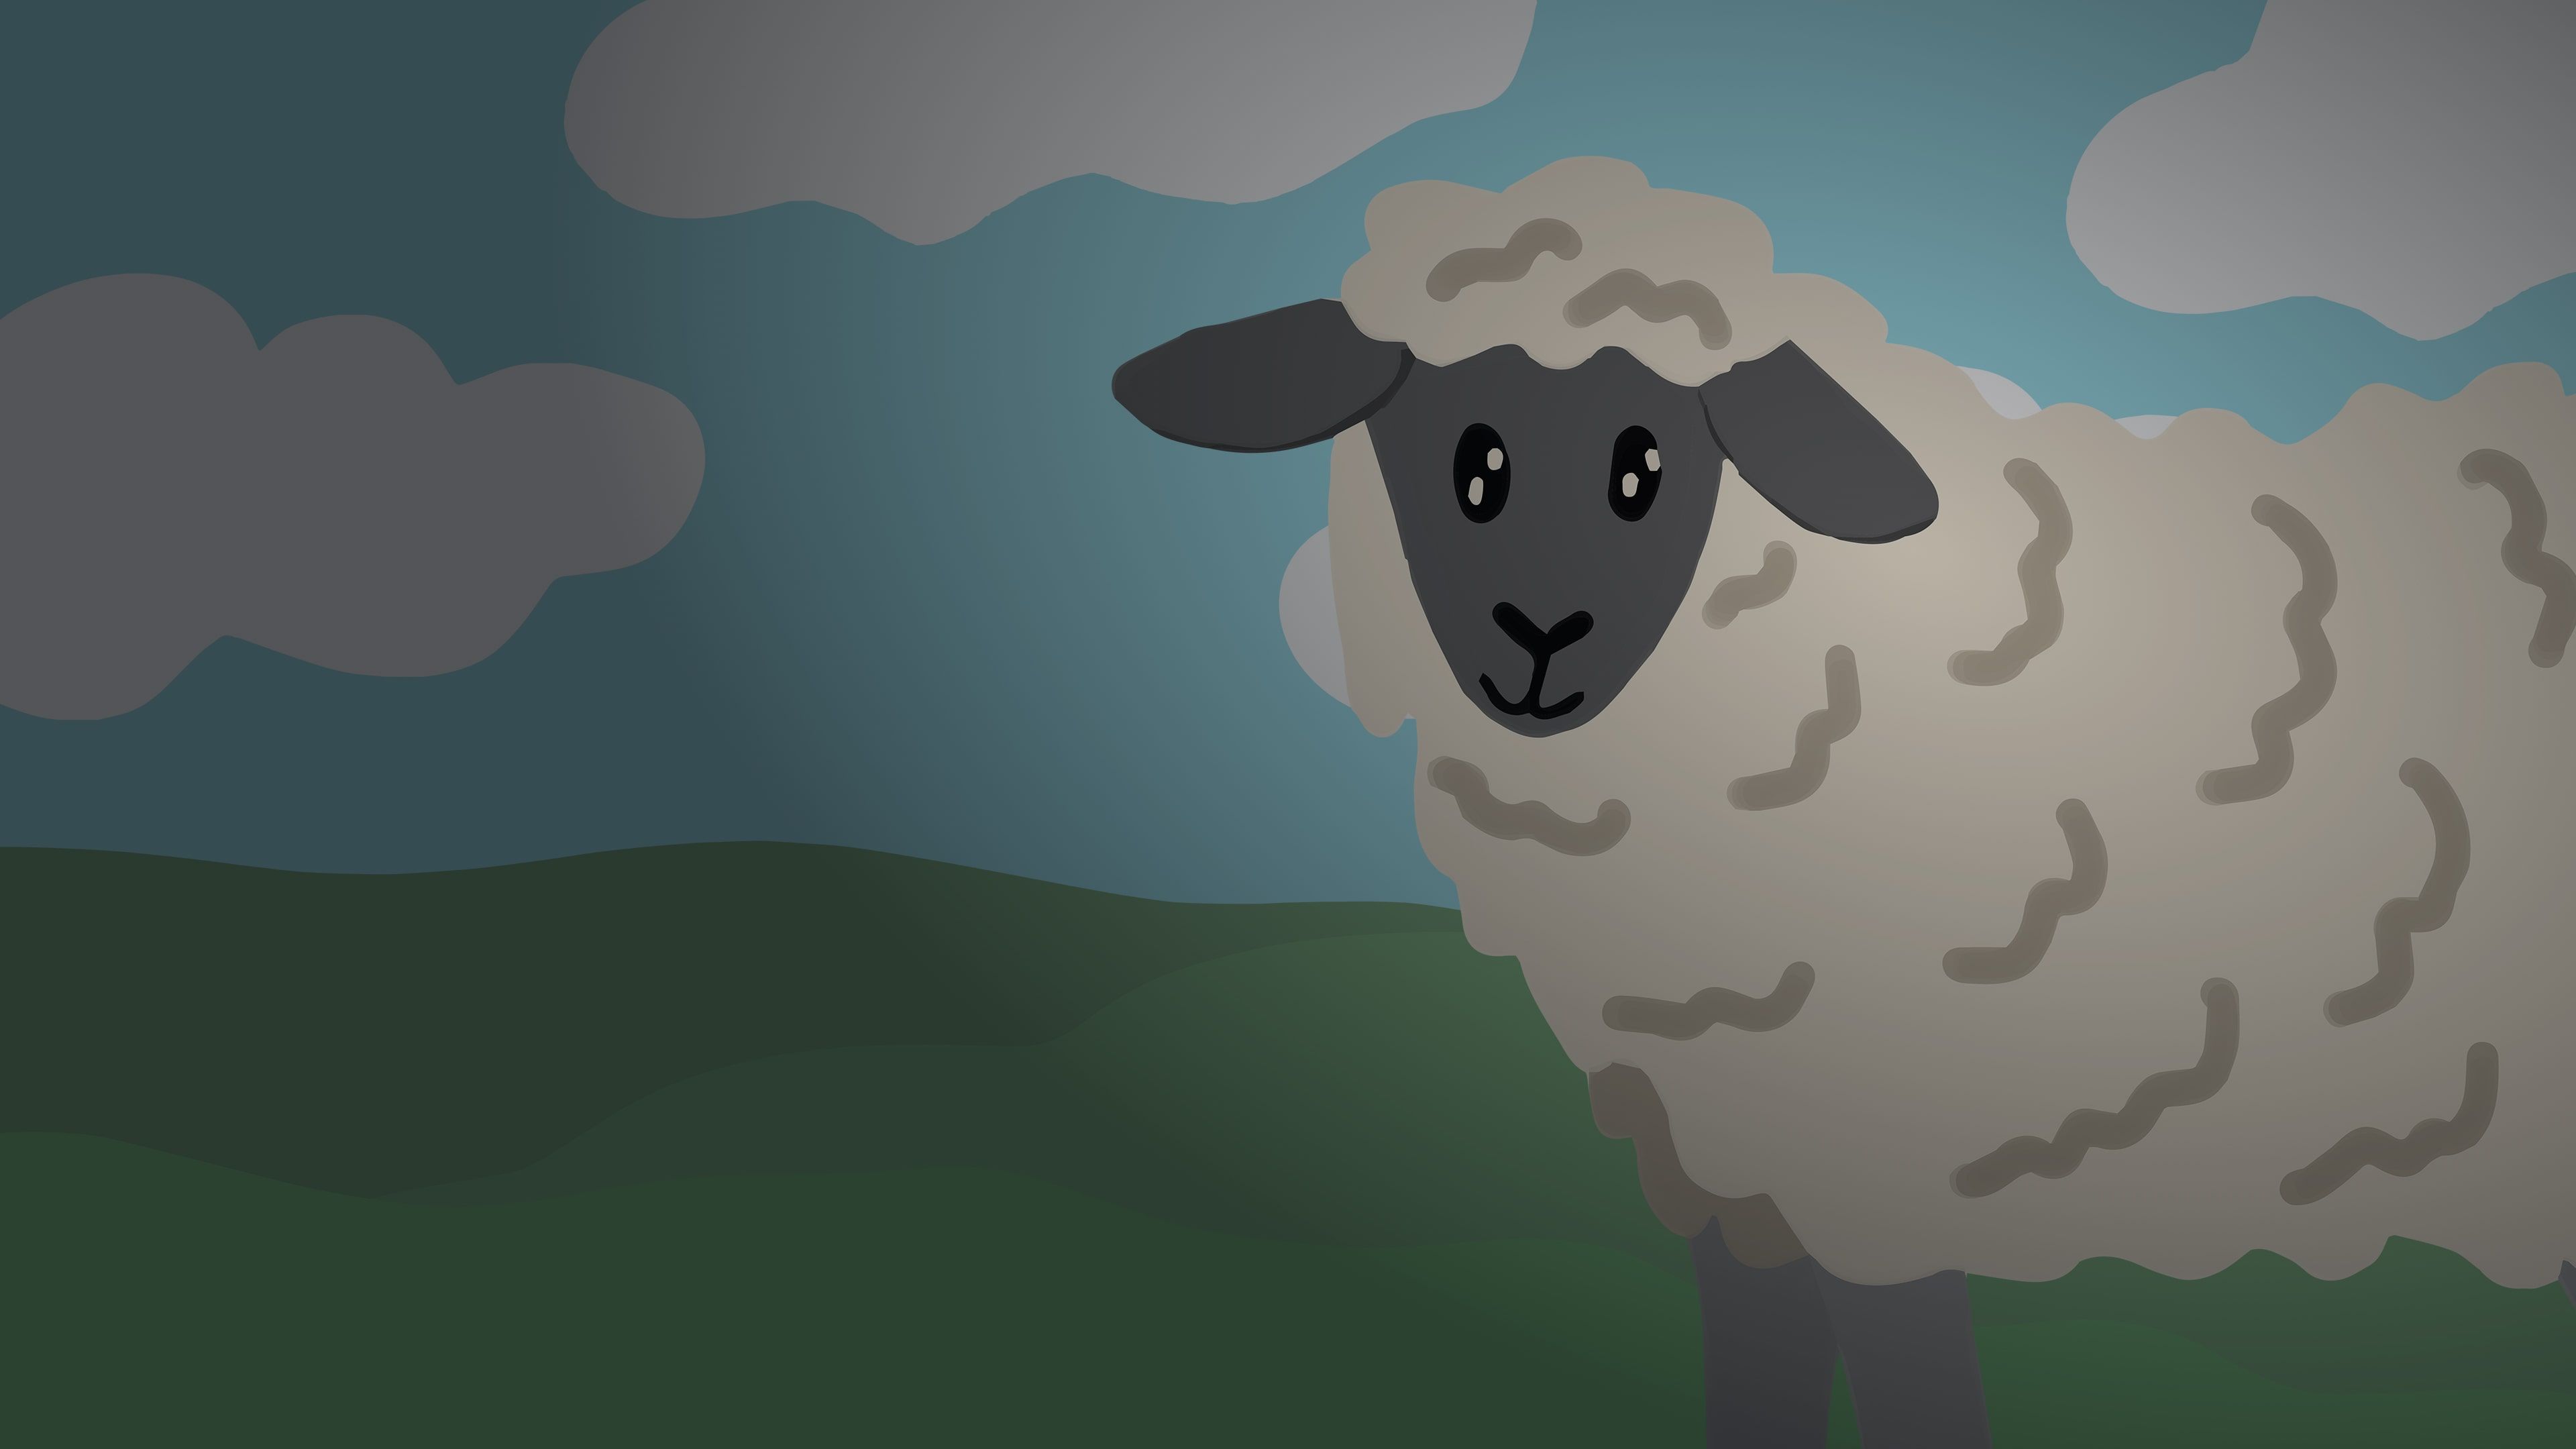 The Sheep P cover image